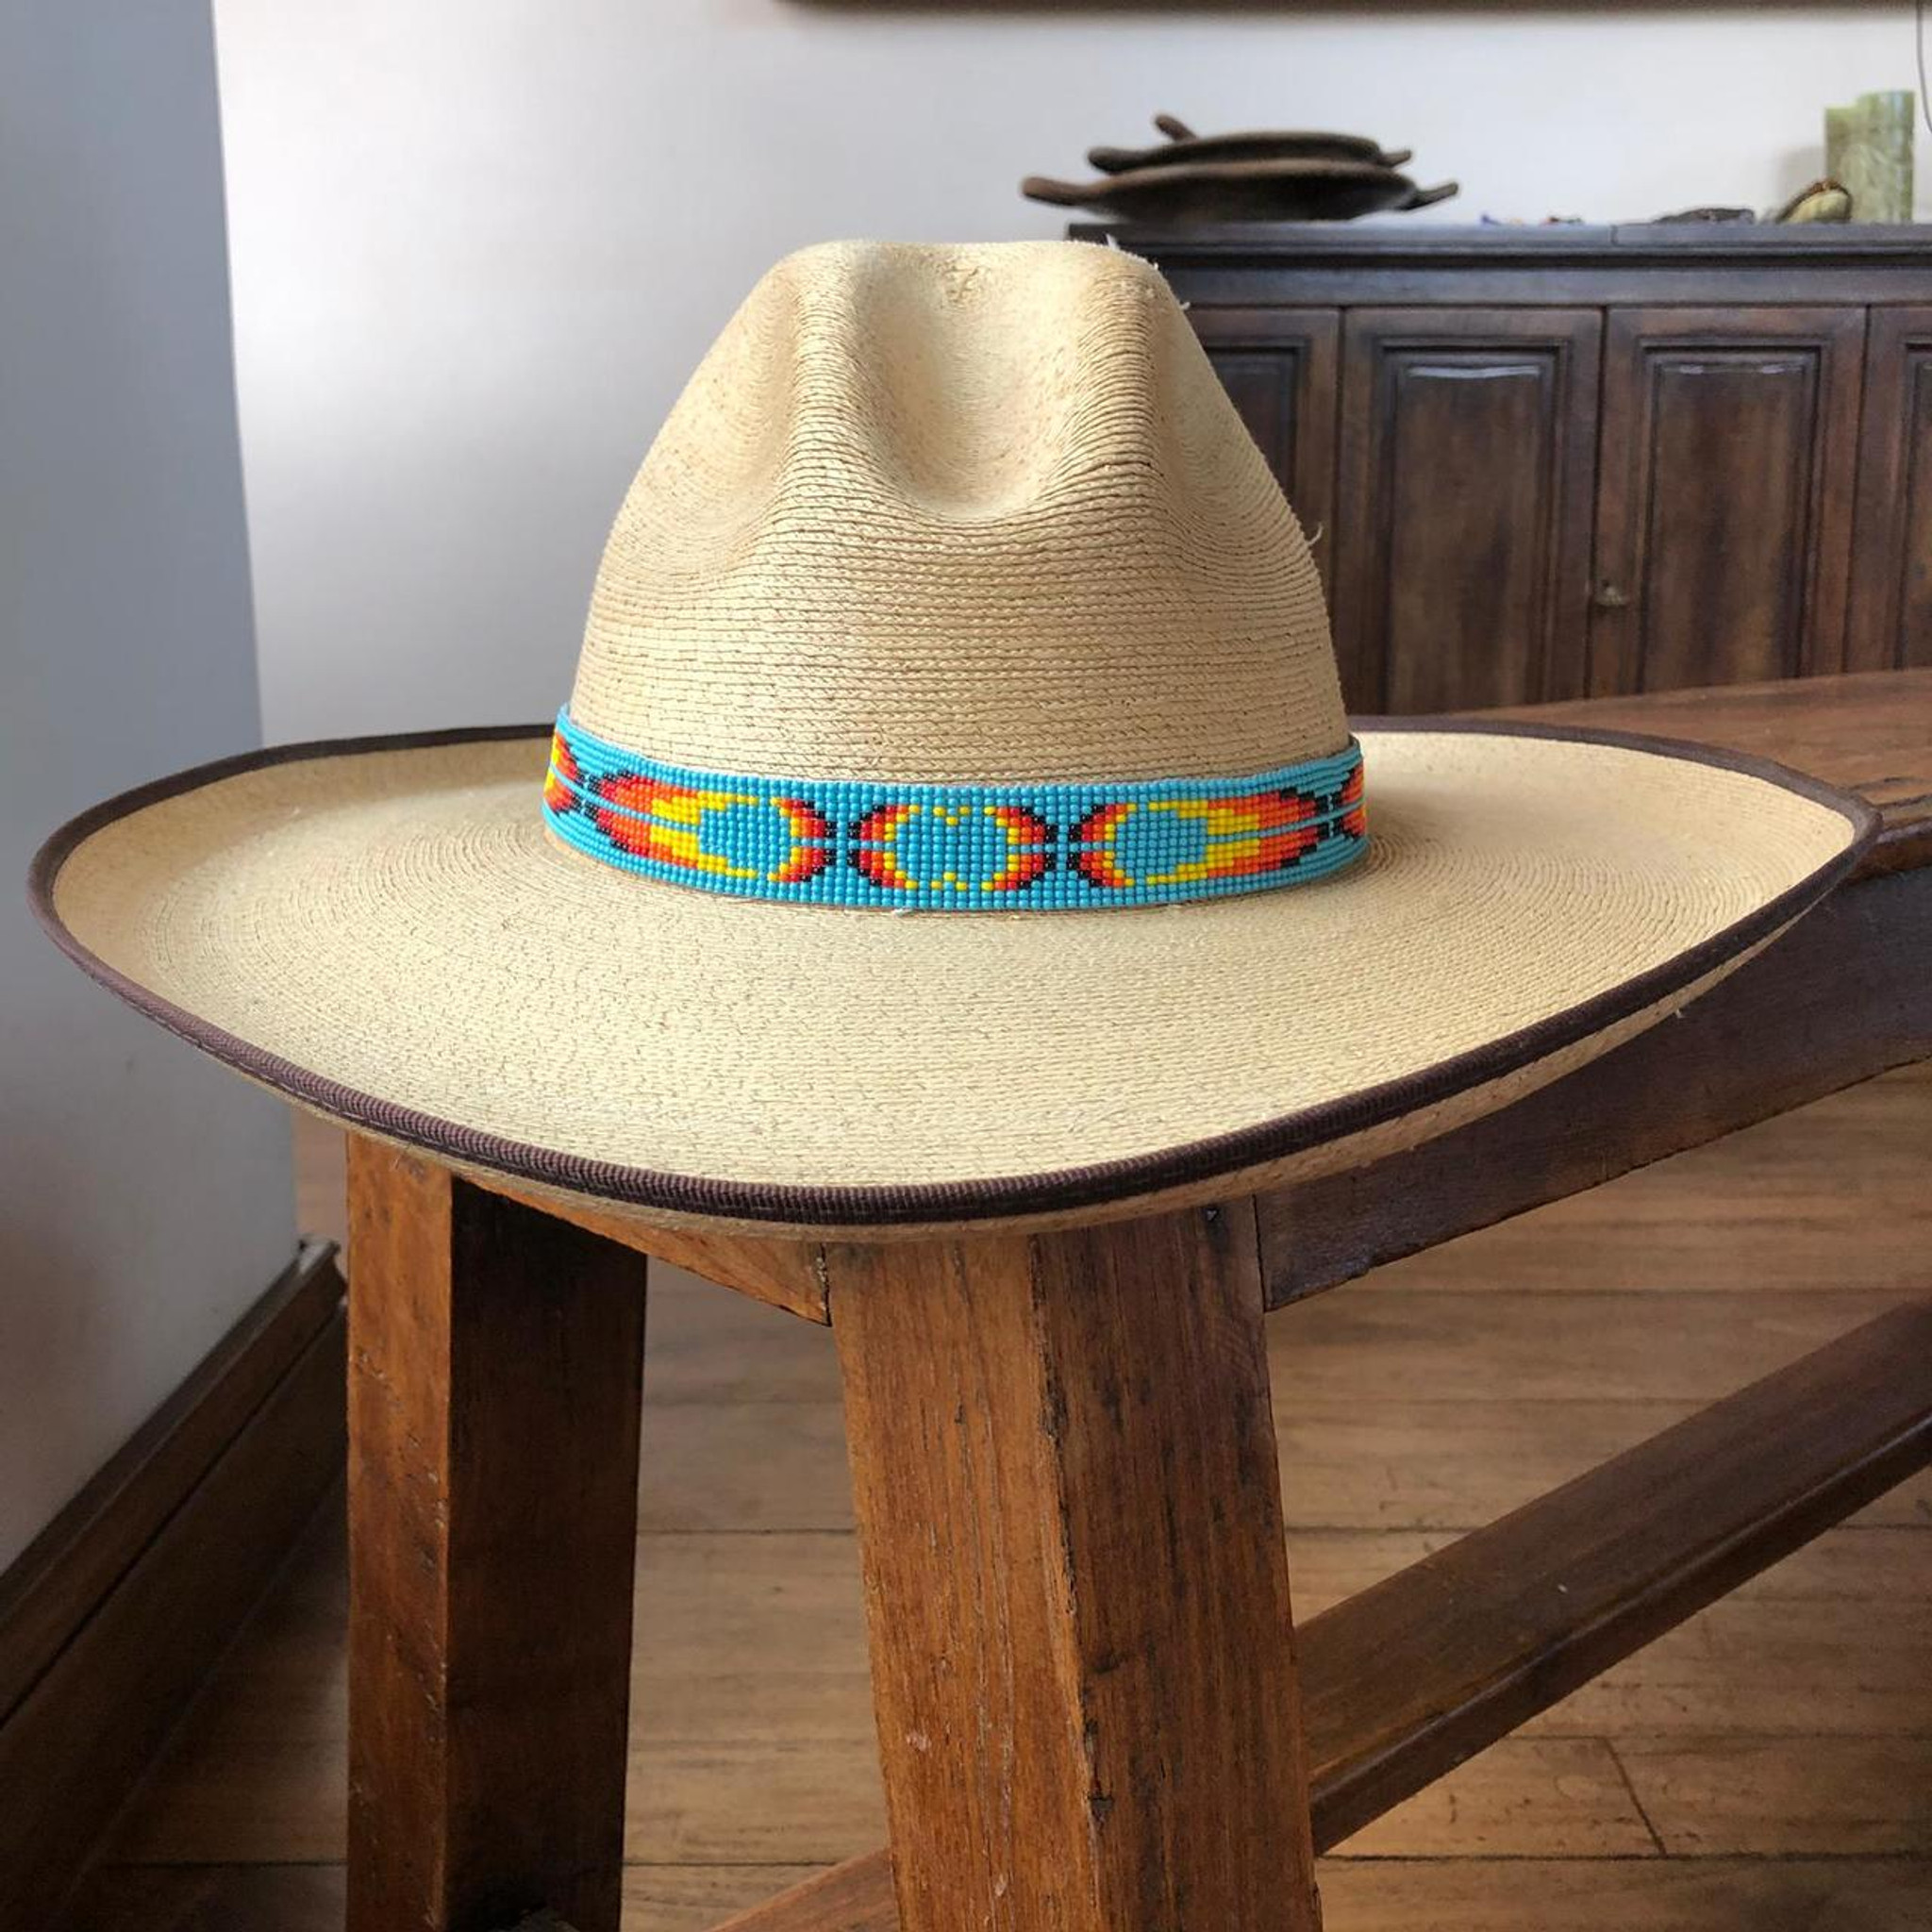 Beaded Hat Band Hatbands Cowboy Western Jewelry Leather 